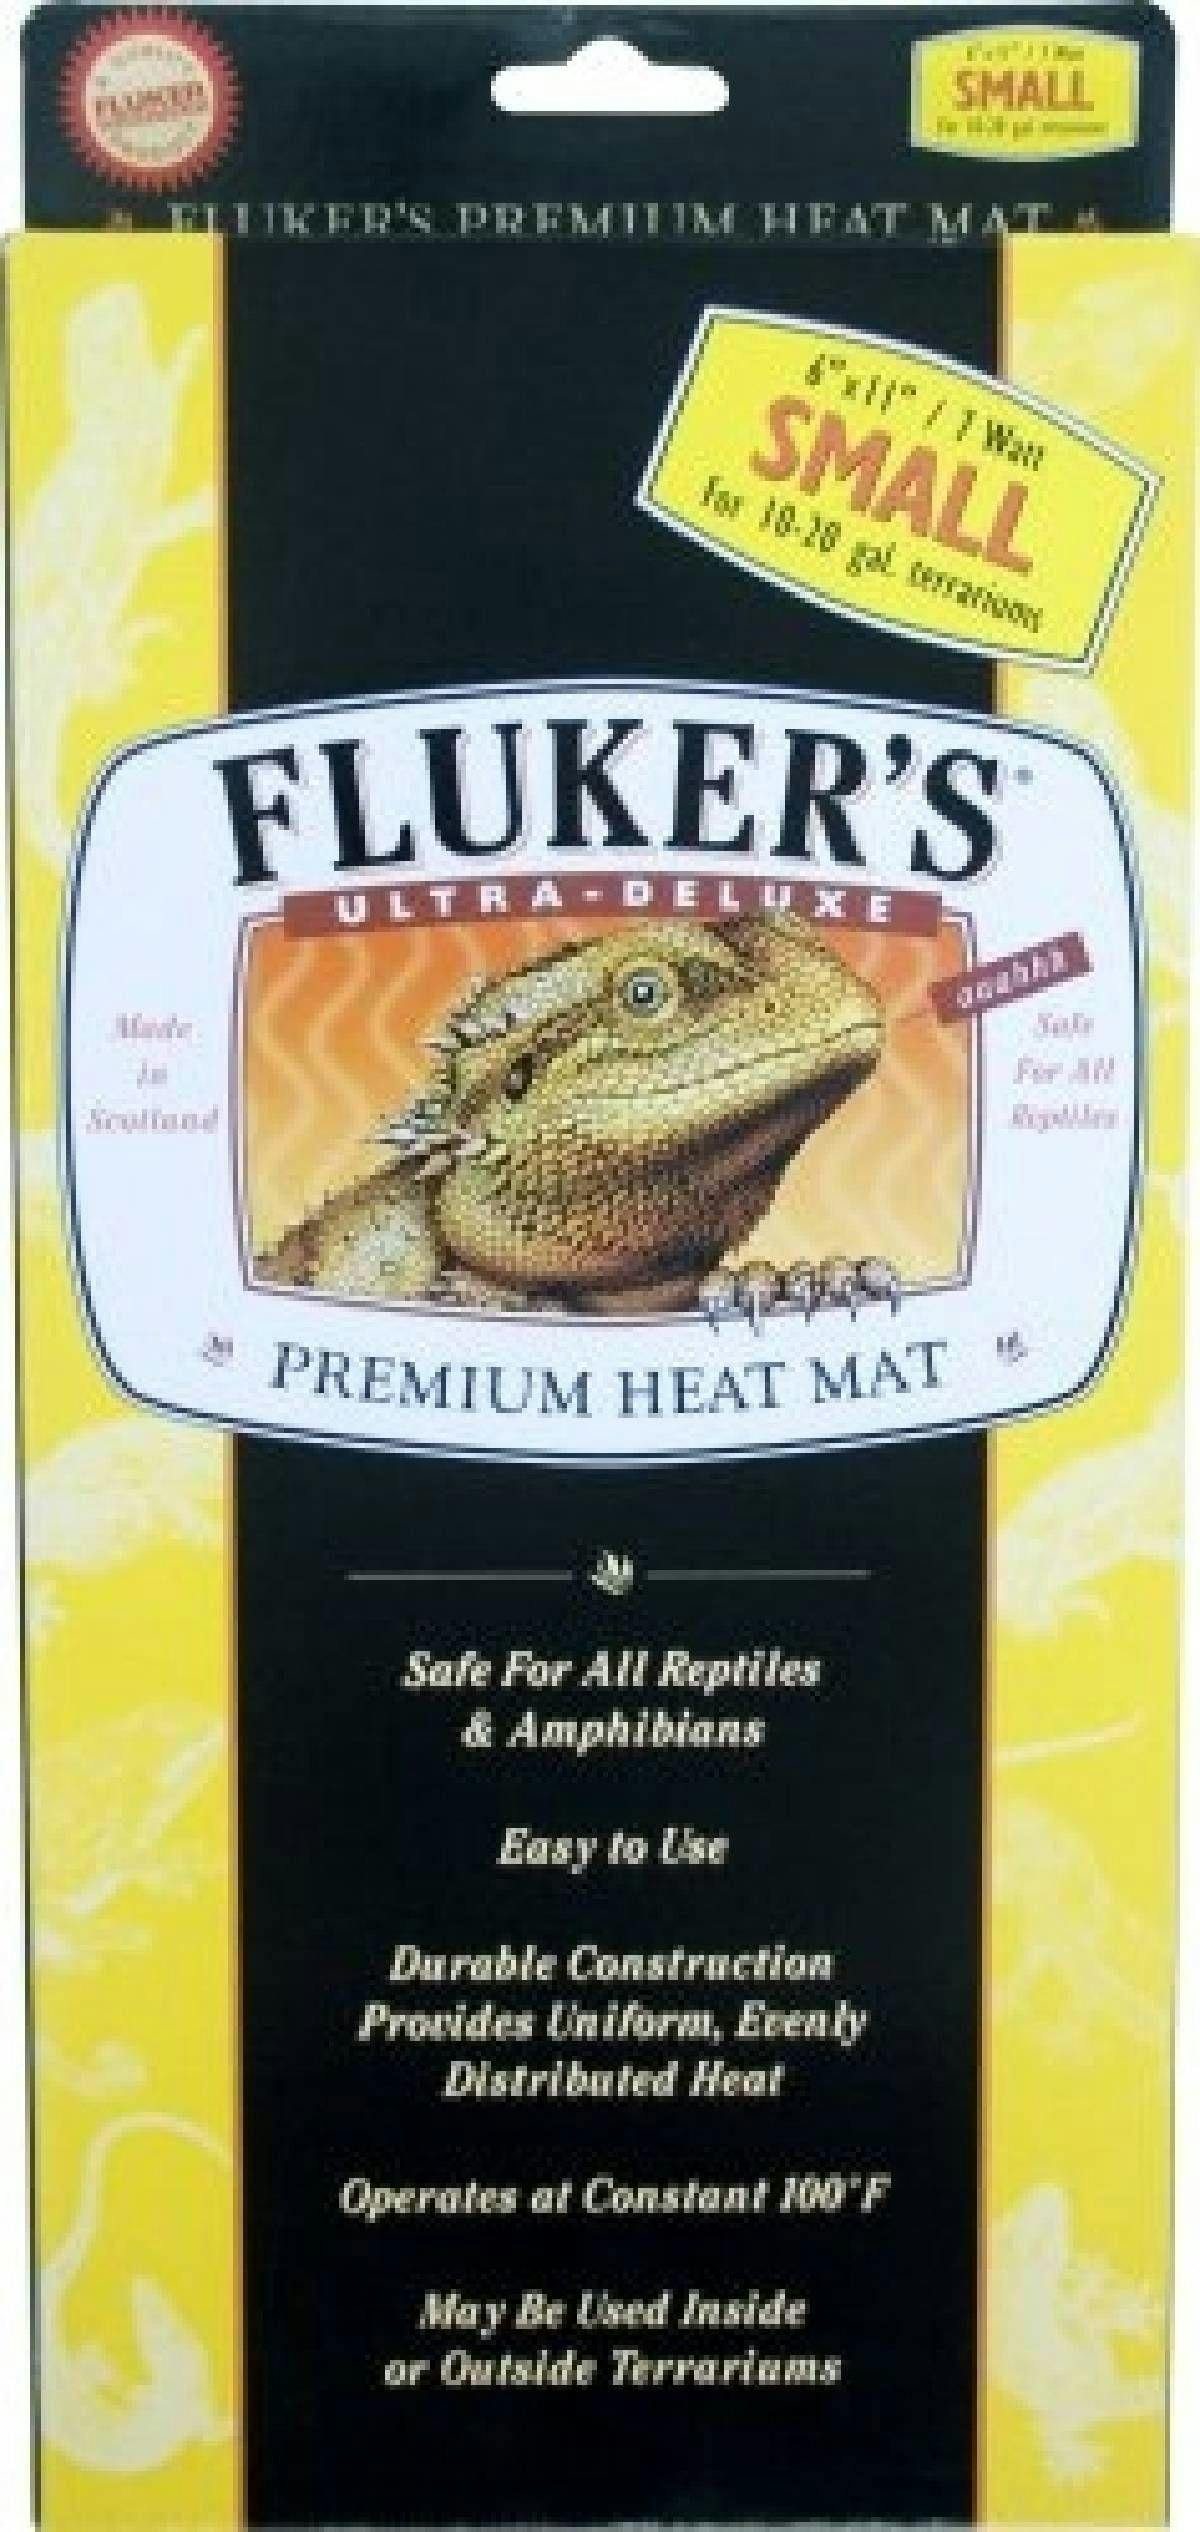 Image for Fluker's Premium Heat Mat (Small) by Josh's Frogs